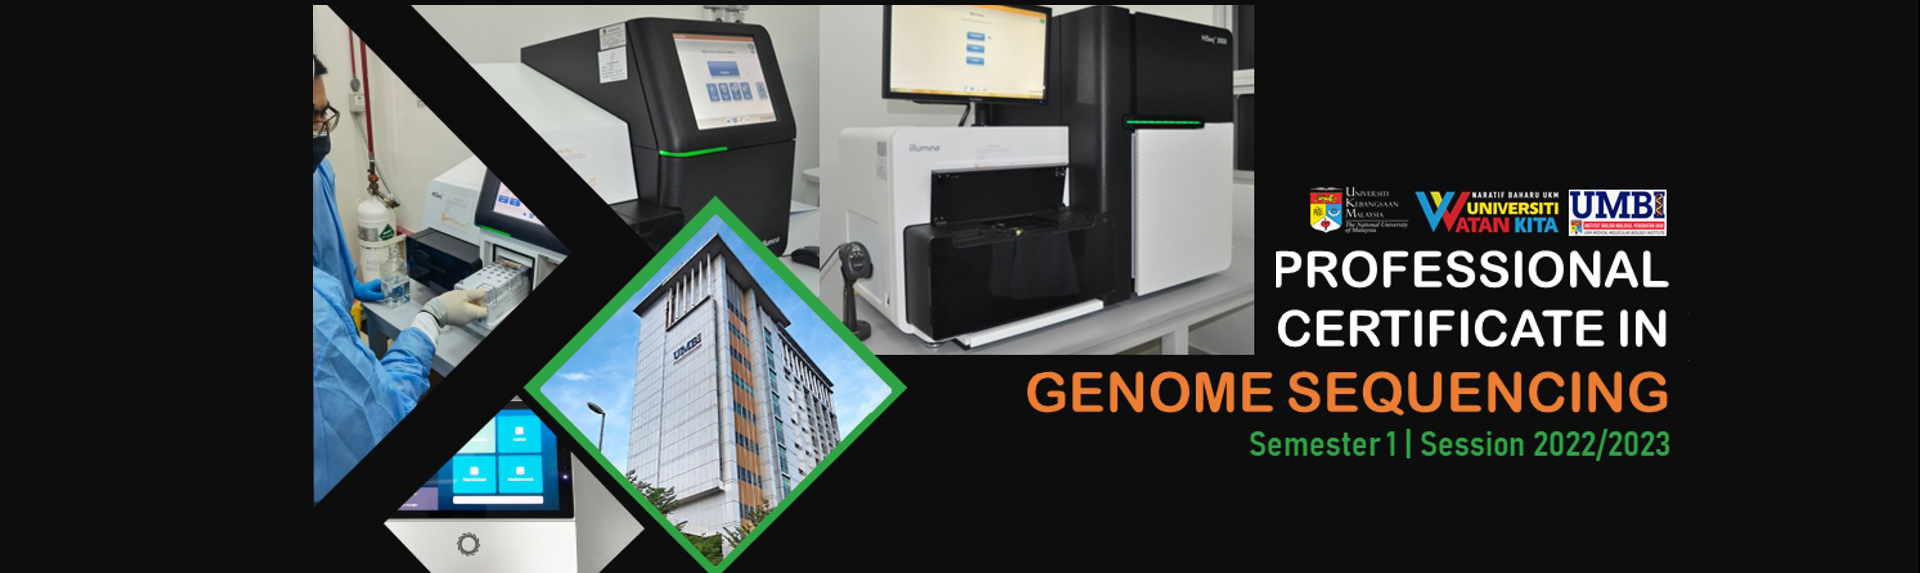 Professional Certificate in Genome Sequencing